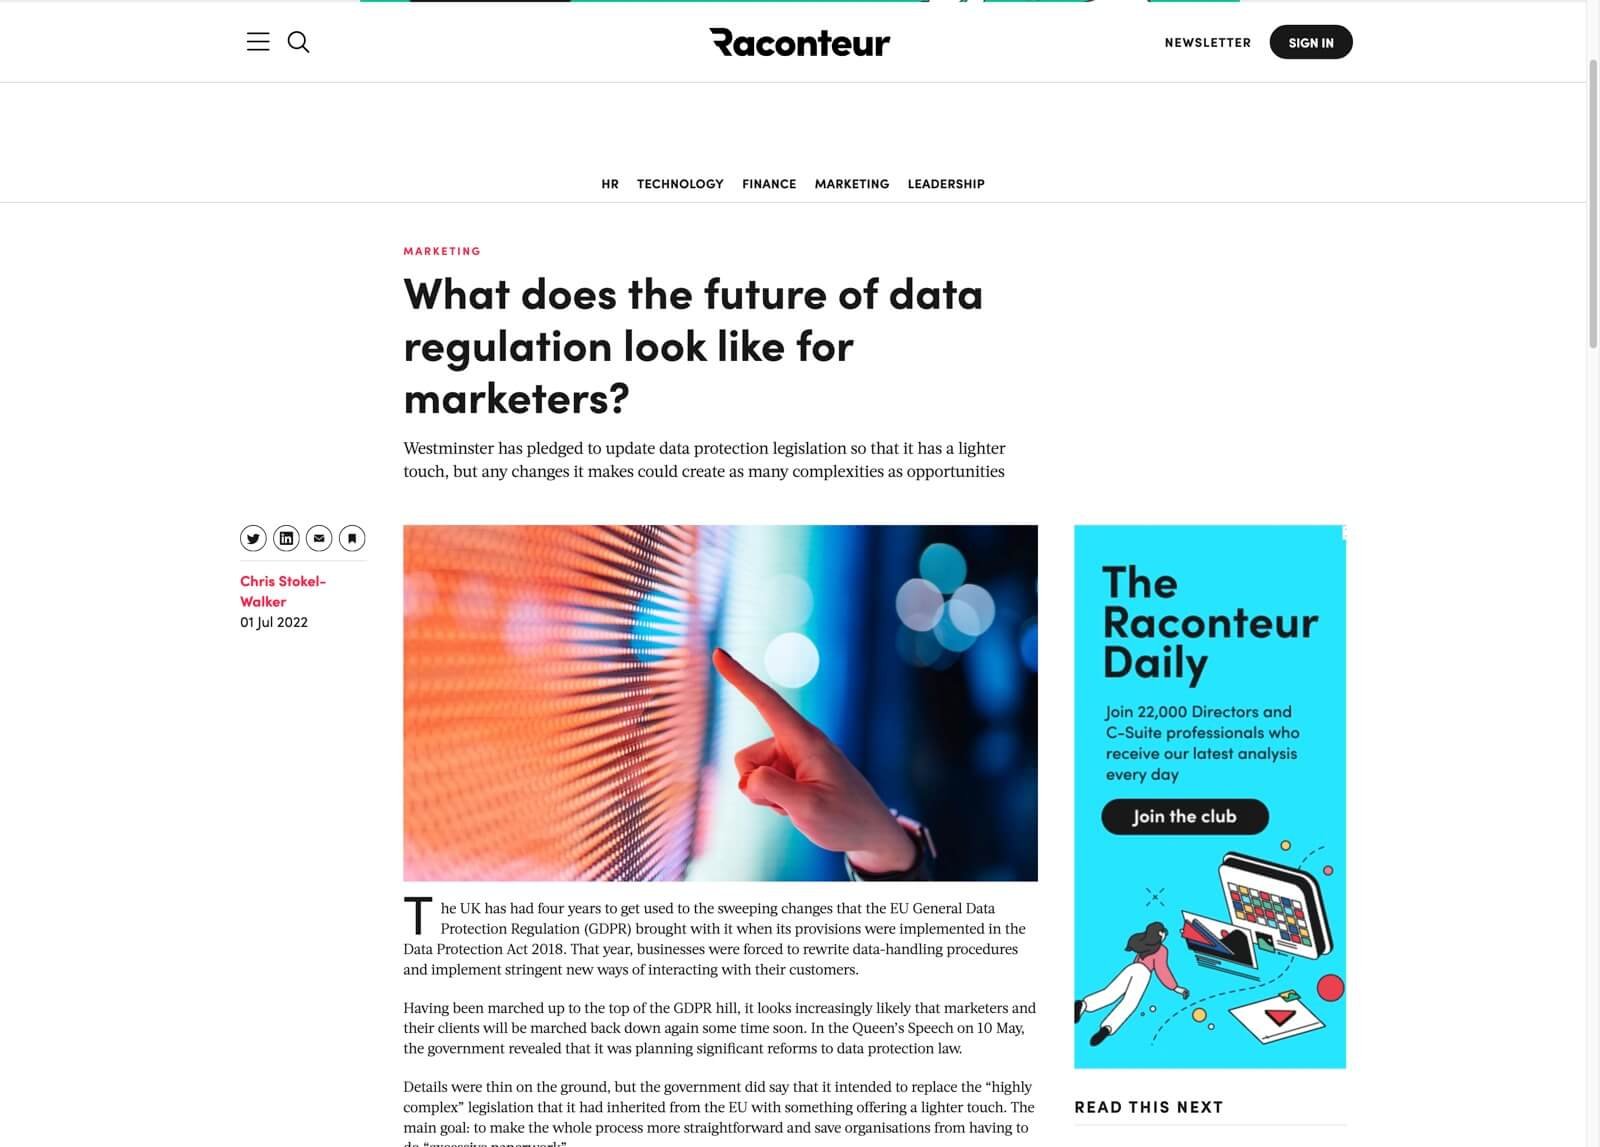 Reconteur-What-does-the-future-of-data-regulation-look-like-for-marketers-Raconteur.jpg